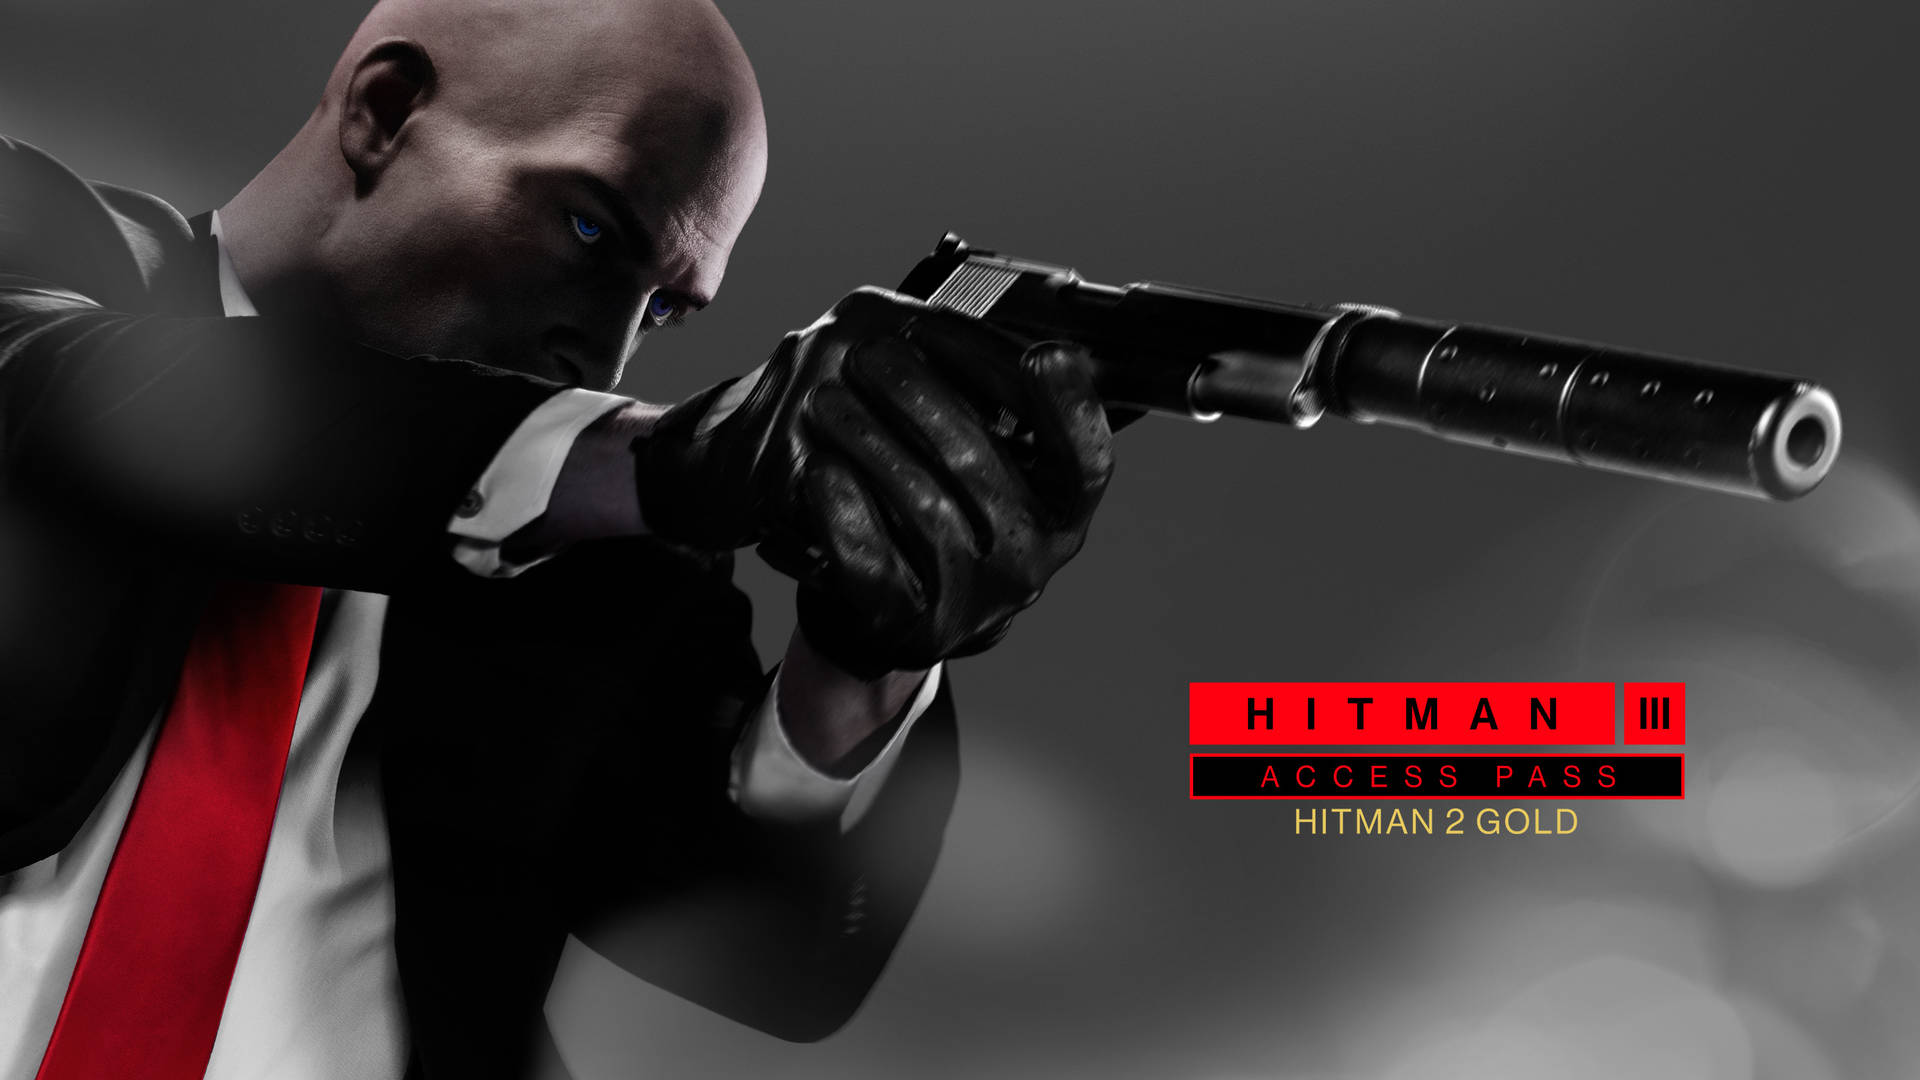 Hitman 2 Red Access Pass Background